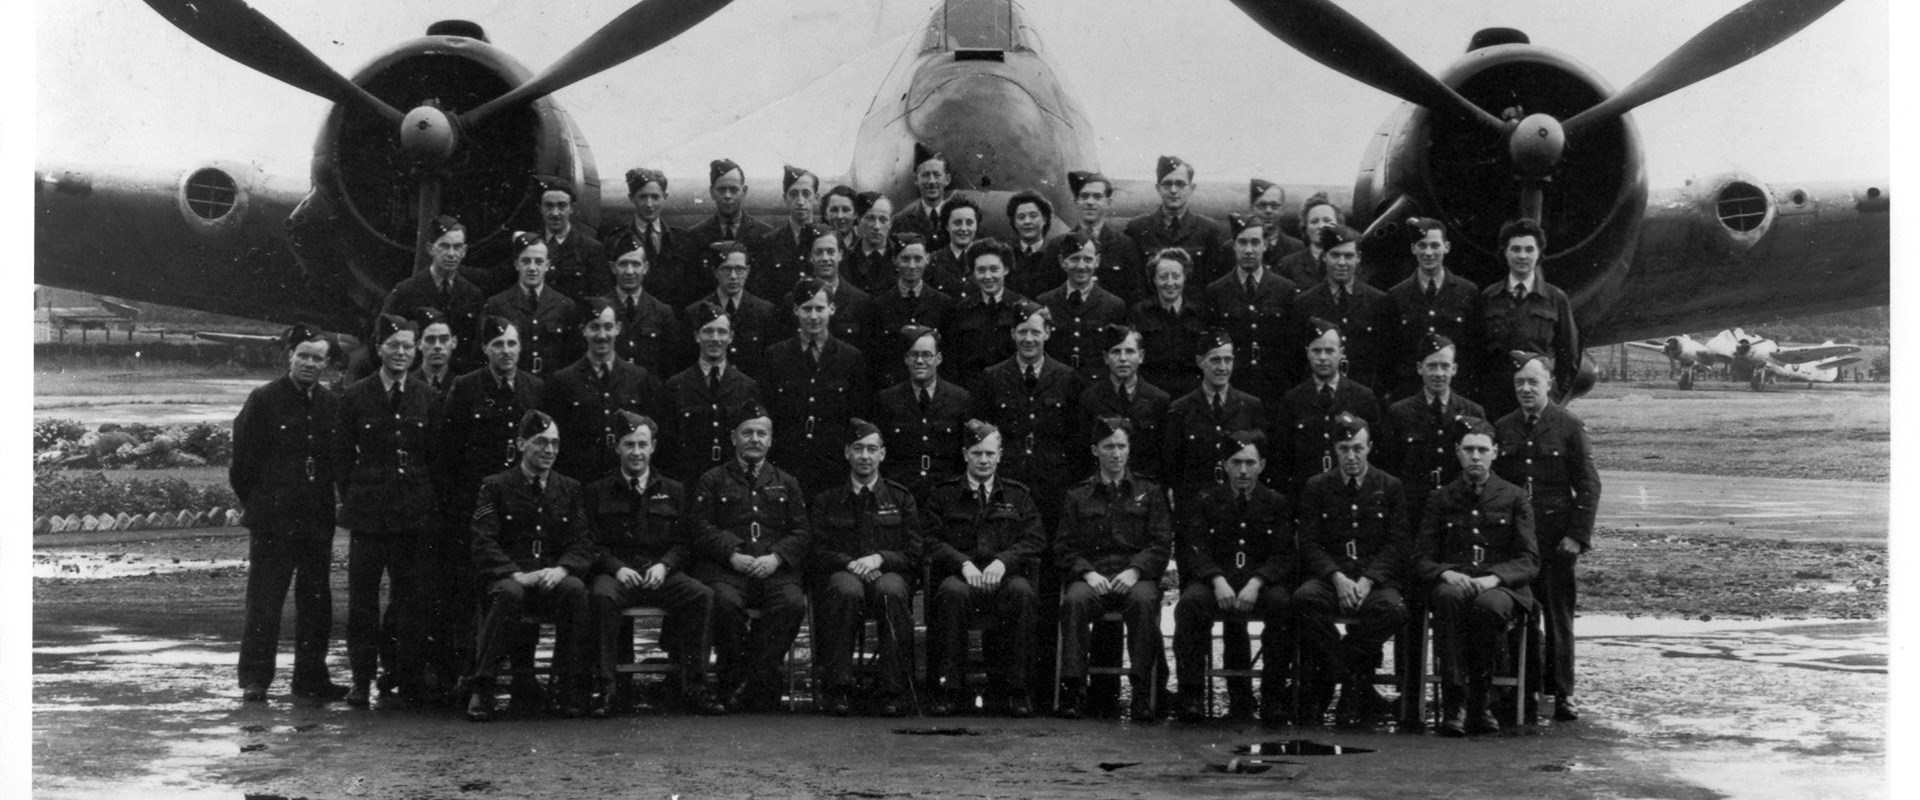 Black and white photo of a group of soldiers in front of a plane on the airfield.